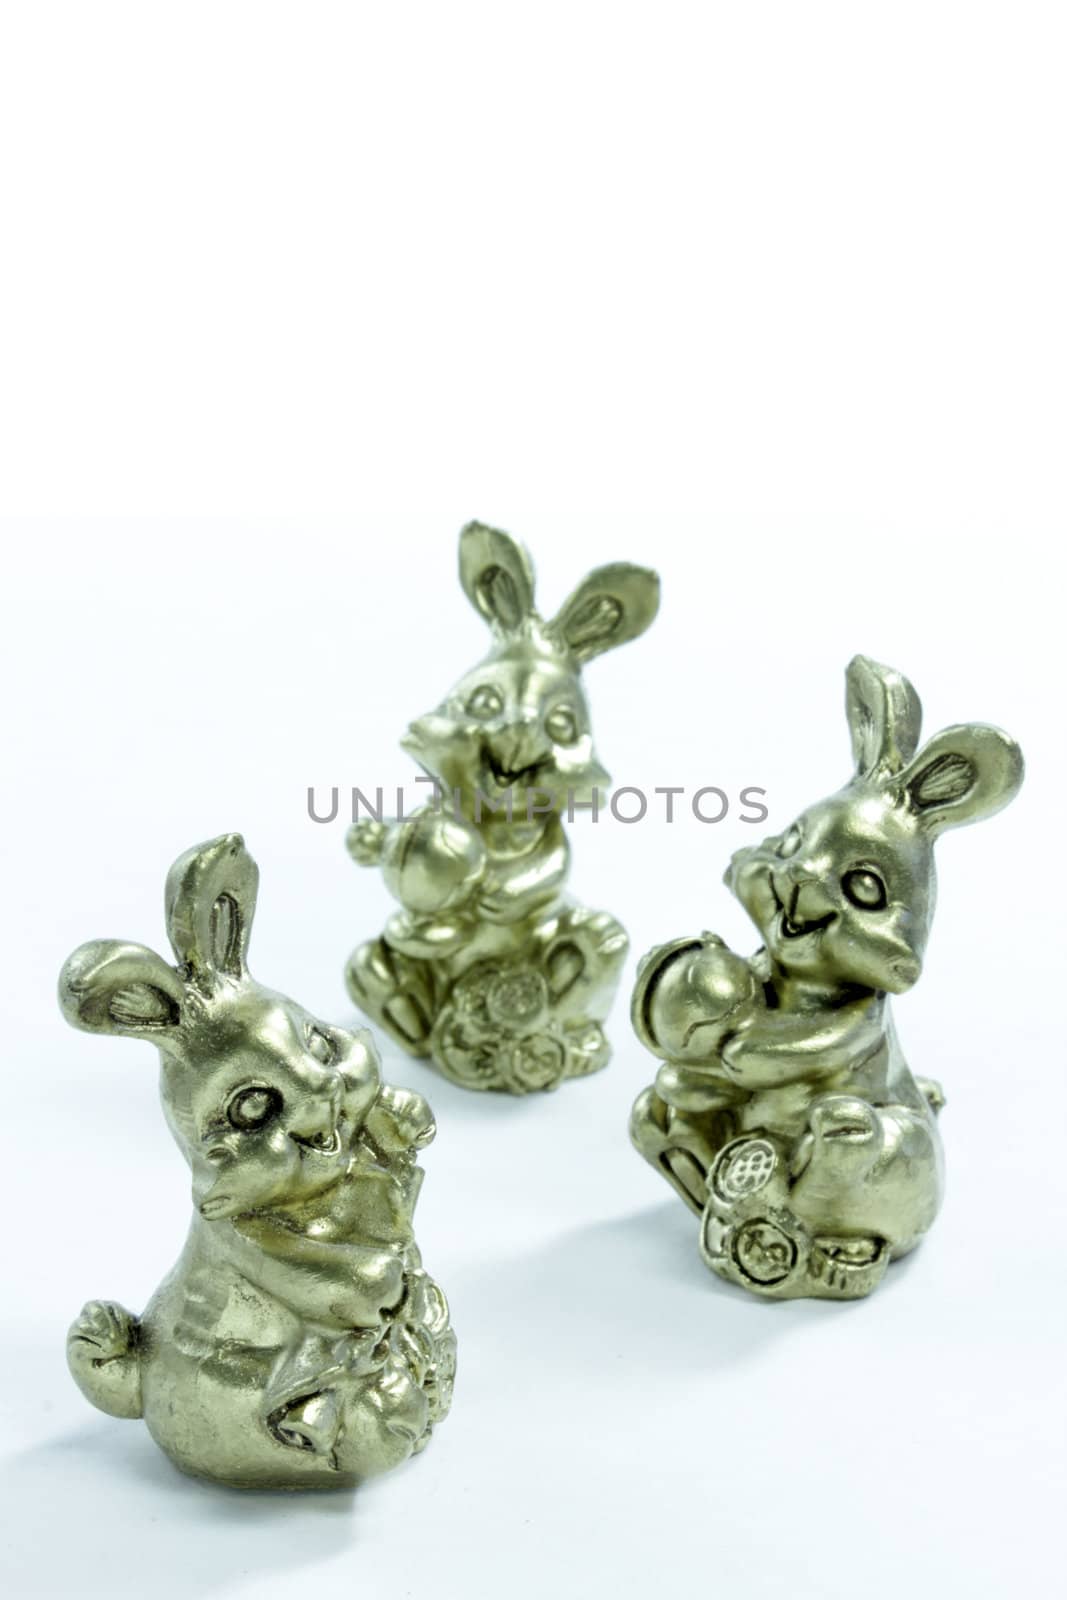 three little rabbits on the white background